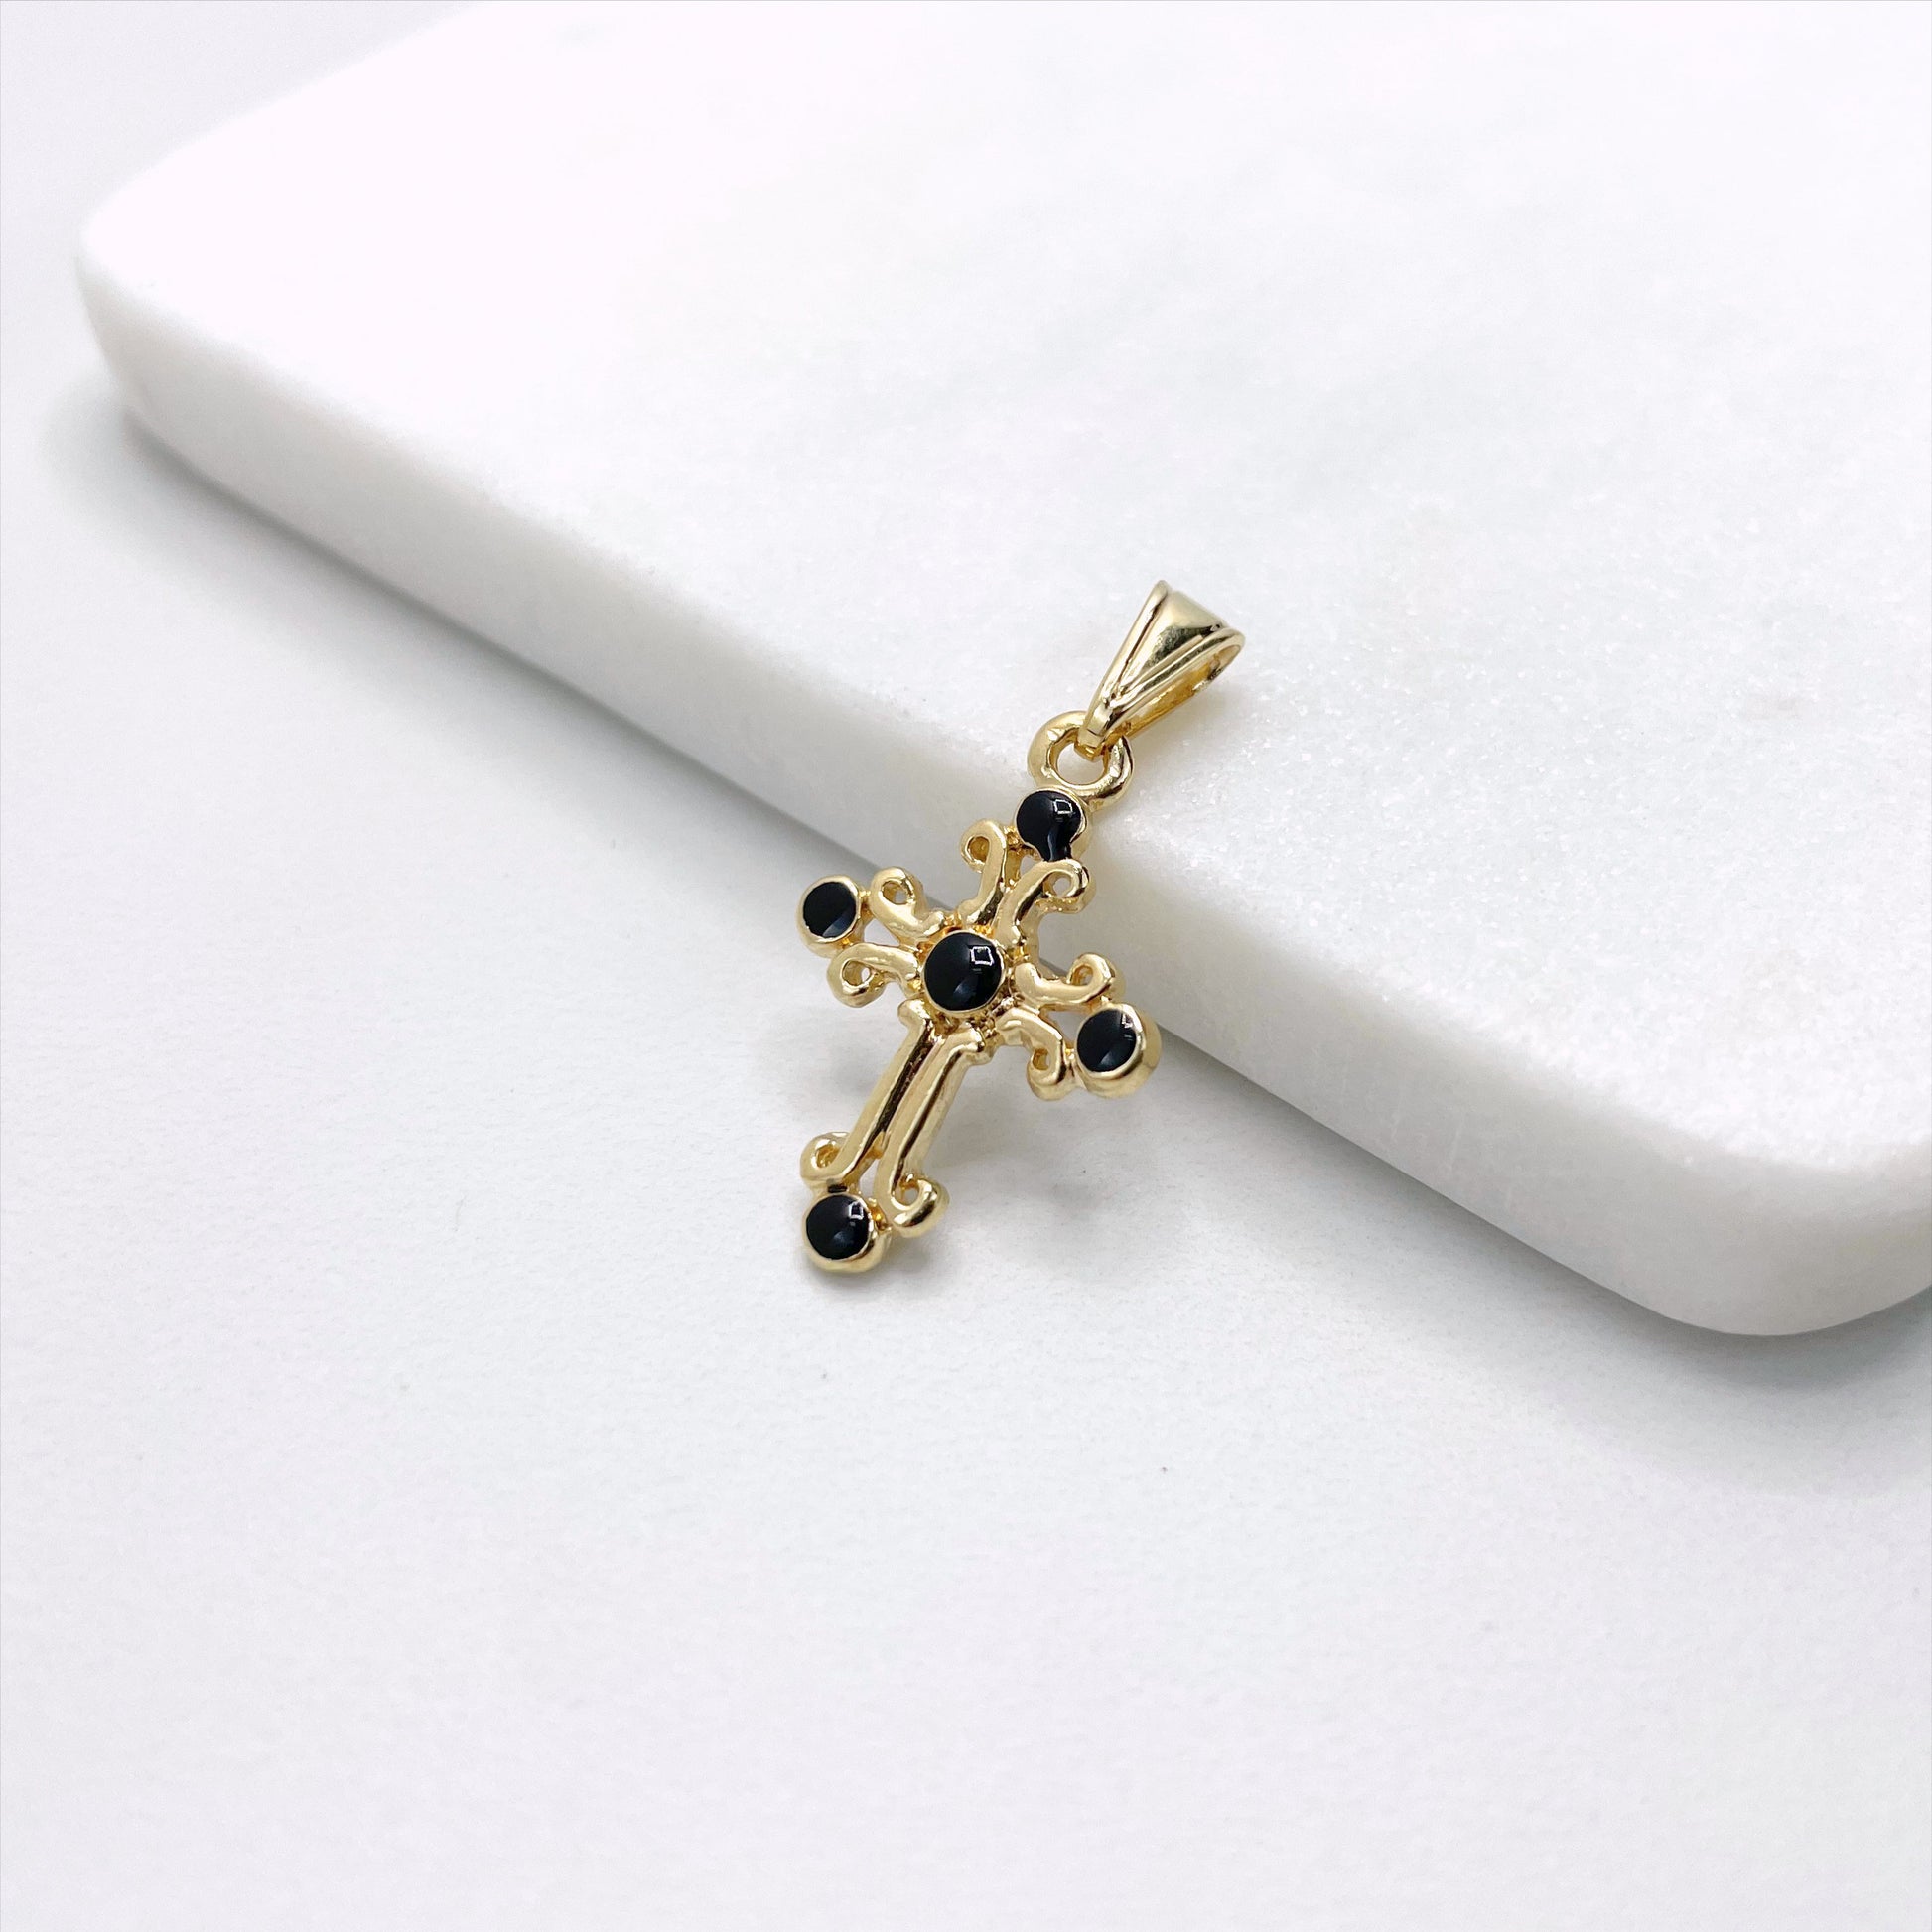 Stylish 18k Gold Filled Cross 1.2 inches with Black Beads Details Charms Pendant, Religious Jewelry, Wholesale Jewelry Making Supplies